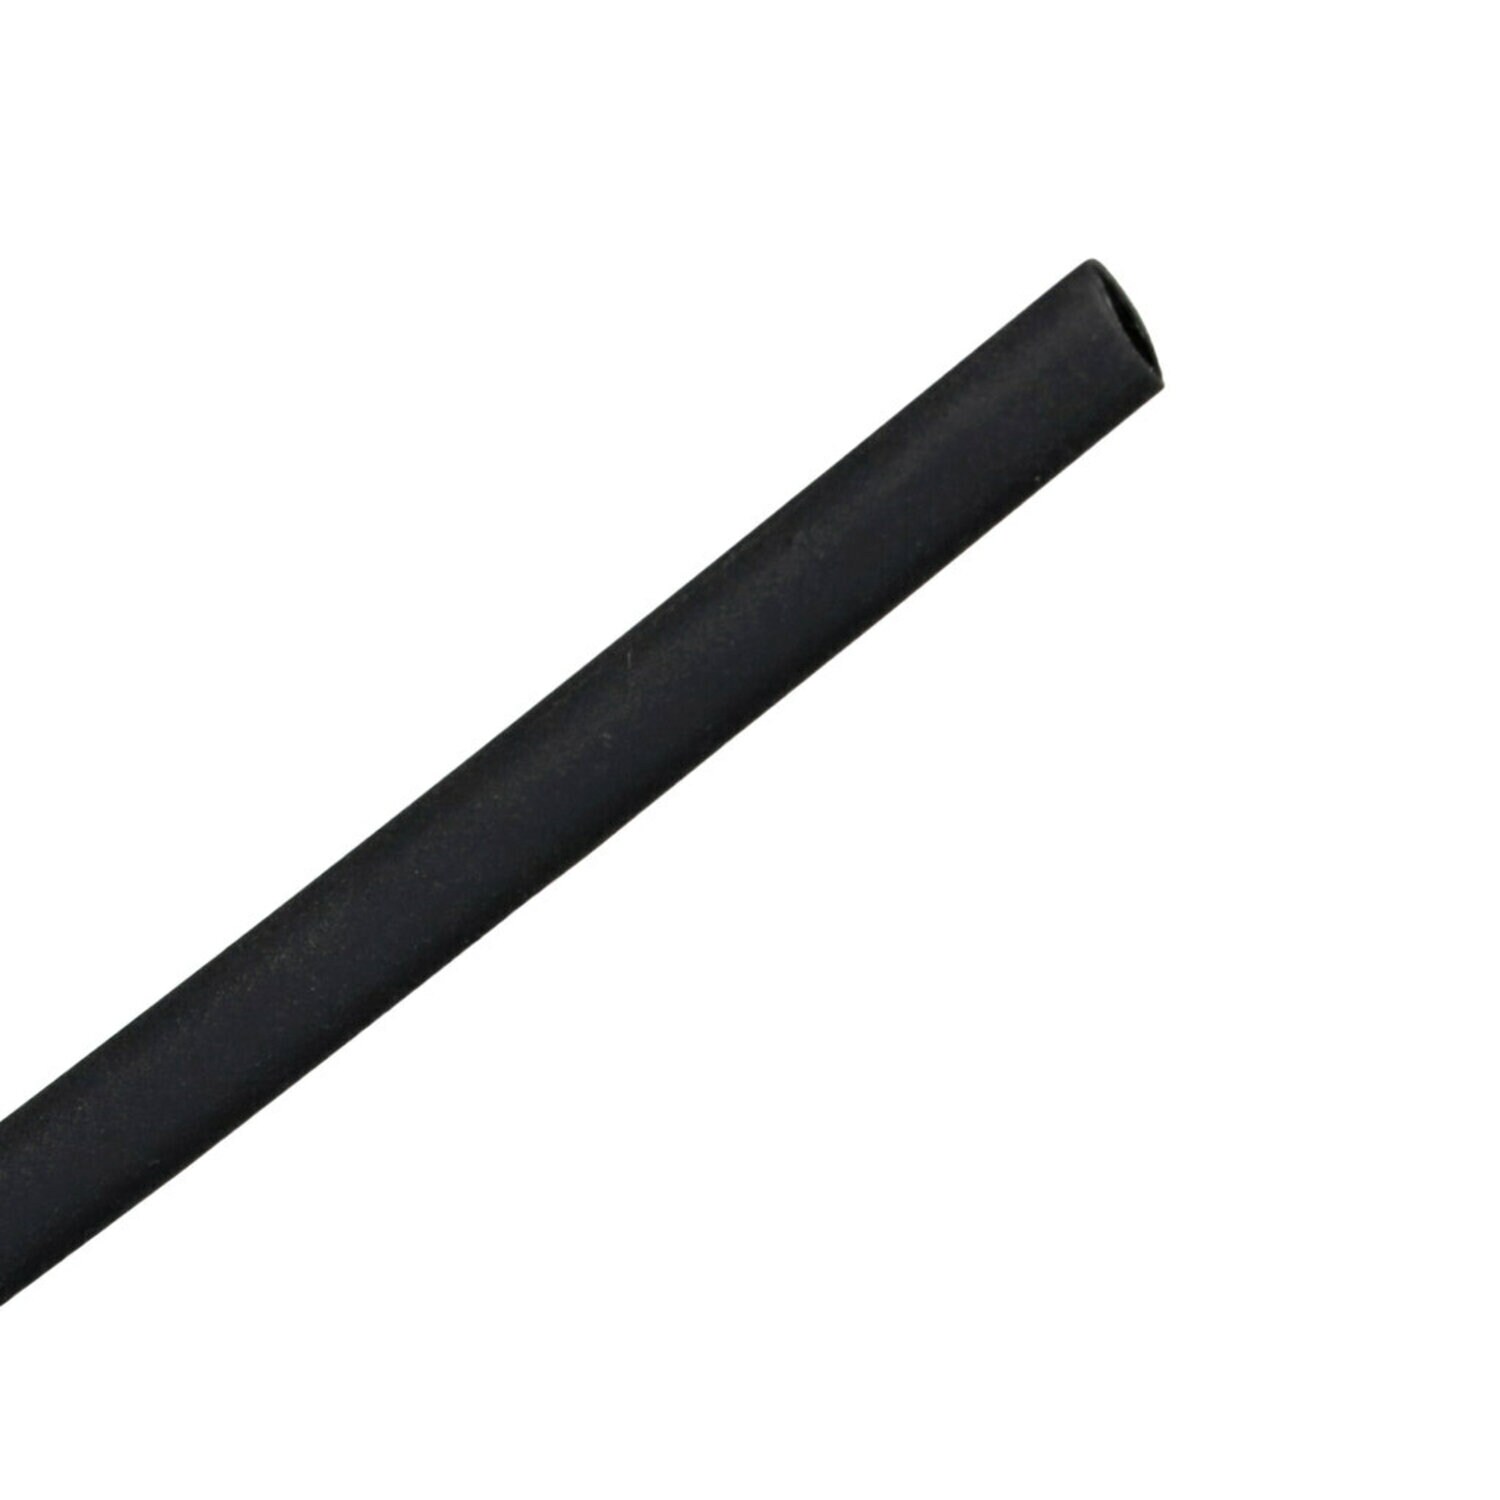 7010399008 - 3M Thin-Wall Heat Shrink Tubing EPS-300, Adhesive-Lined, 1/8" Black
6-in piece, 10/Case